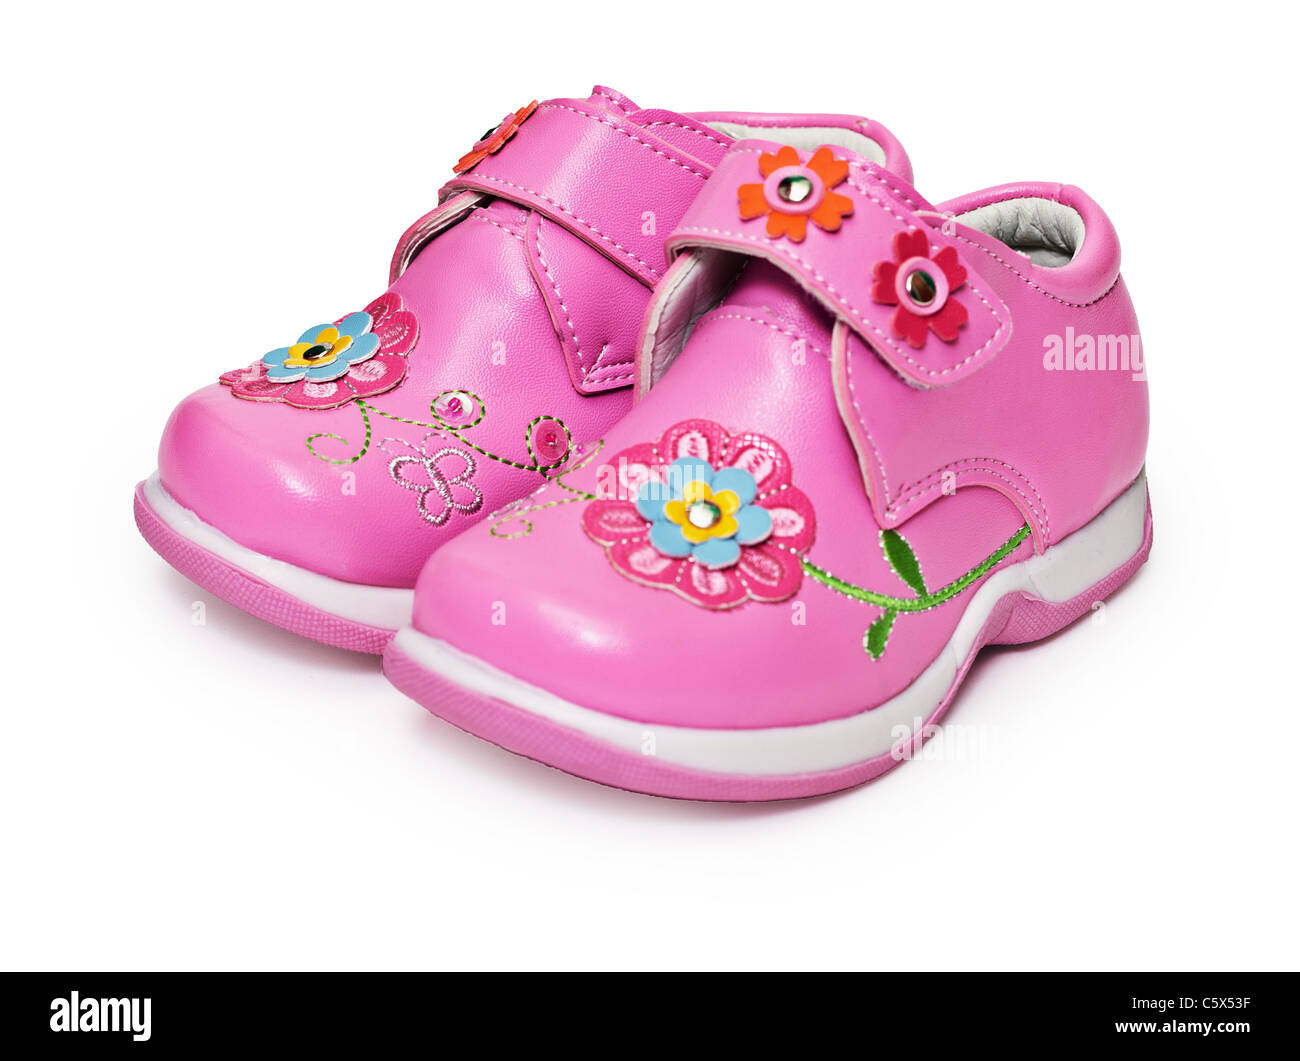 Shoes for little girls decorated with flowers isolated on white background Stock Photo